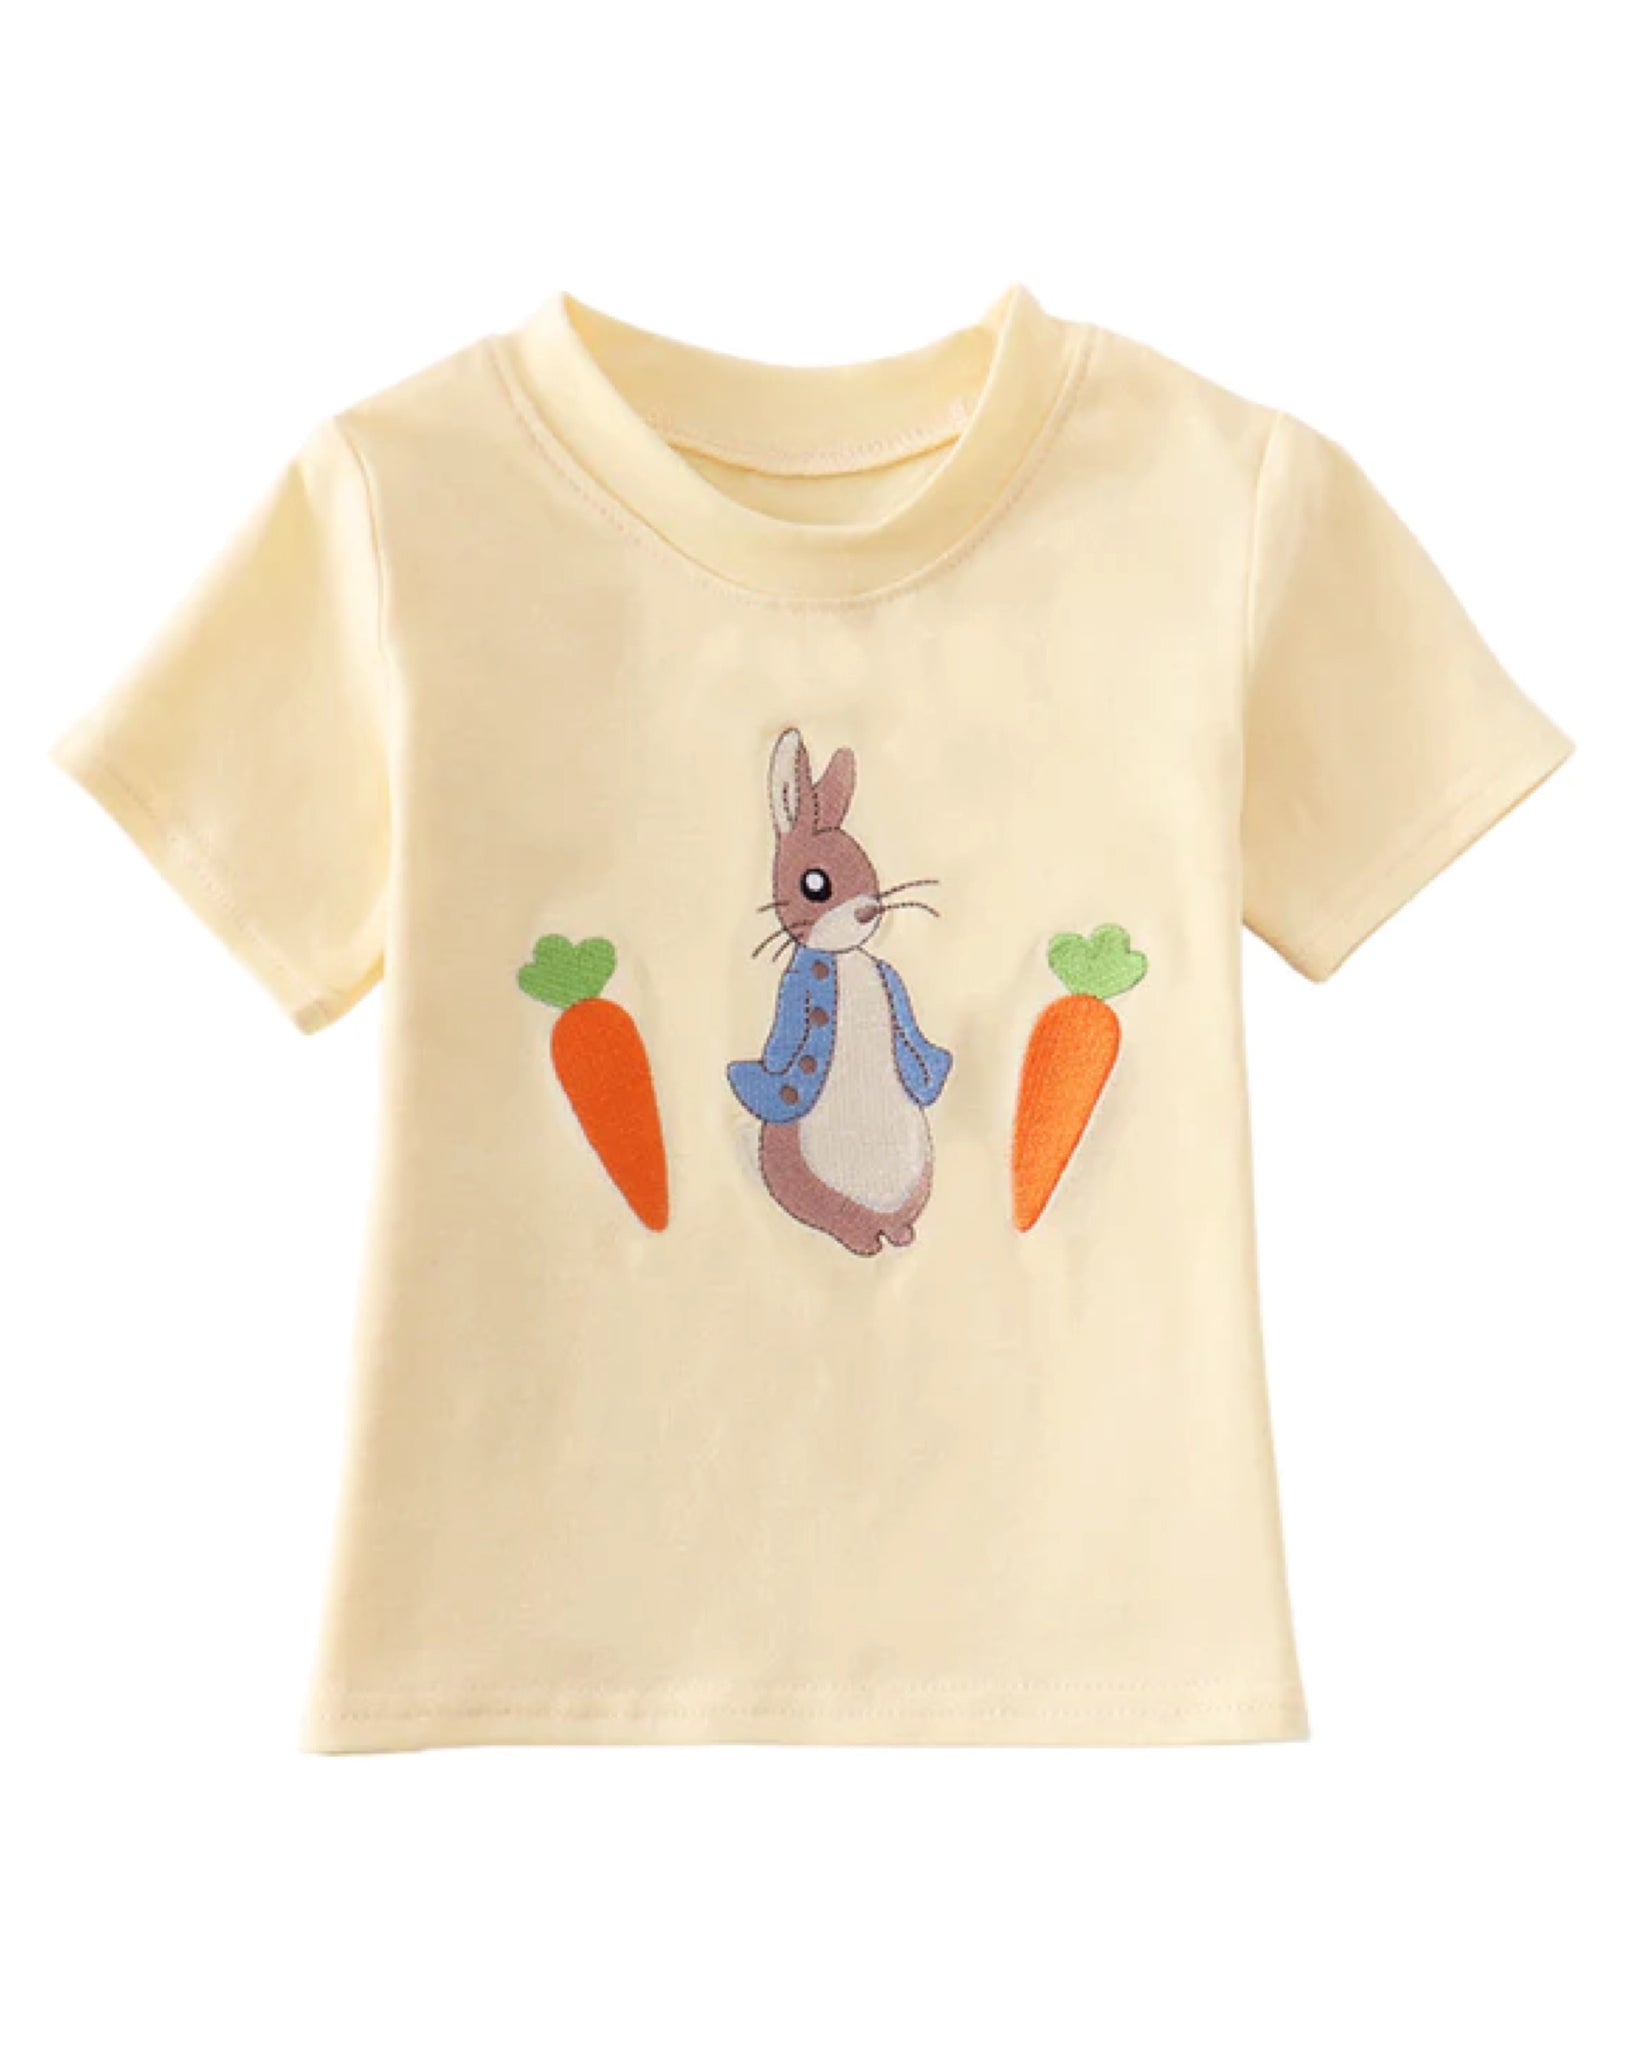 Bunny Embroidery T-Shirt: 12m